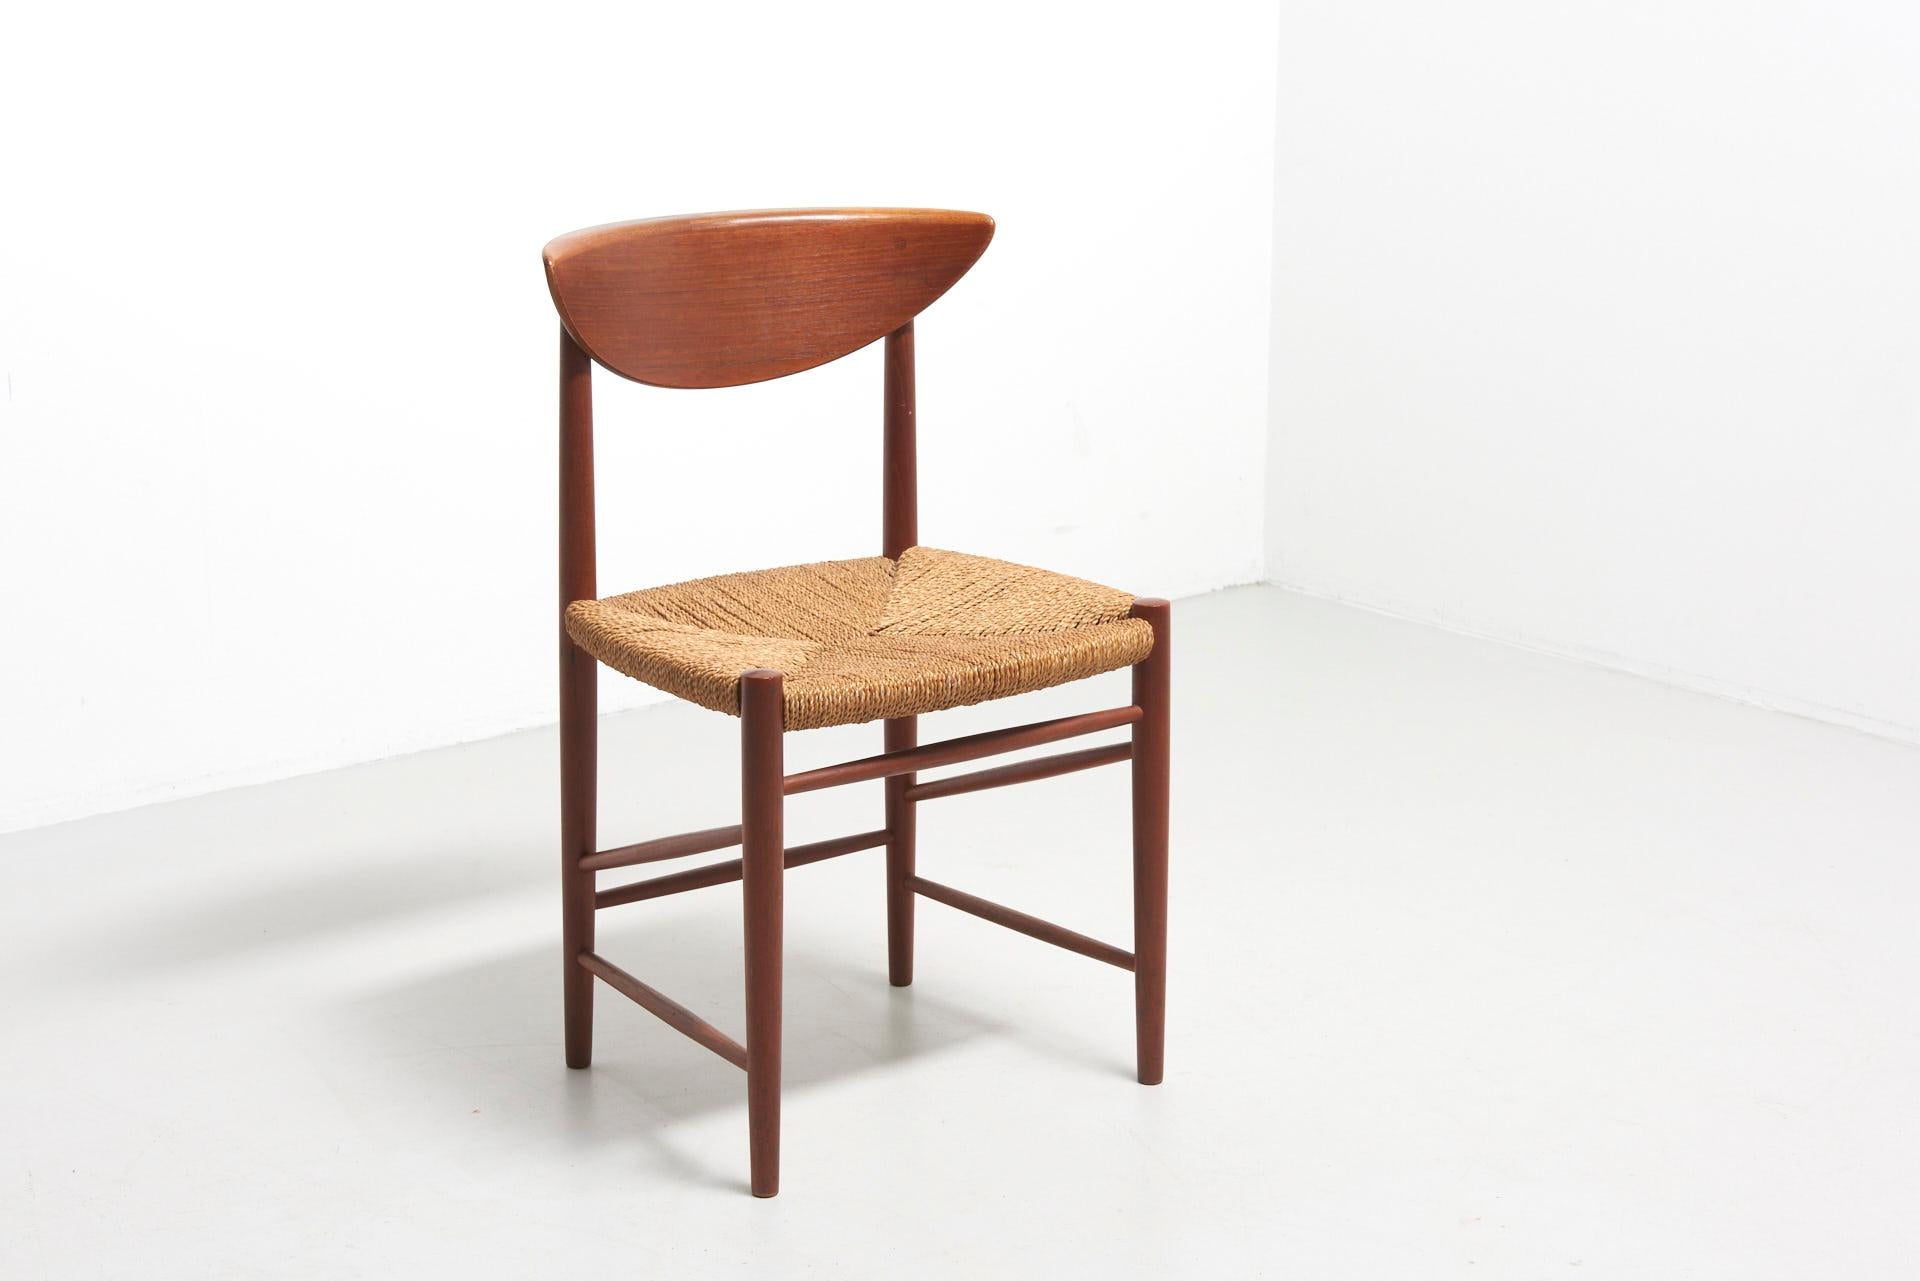 Model 316 is designed by Peter Hvidt & Orla Mølgaard-Nielsen for the Søborg Møbelfabrik in Denmark in the 1950s. The chair features a folded backrest, carefully made wood joints, sloping trusses and a paper cord seat.